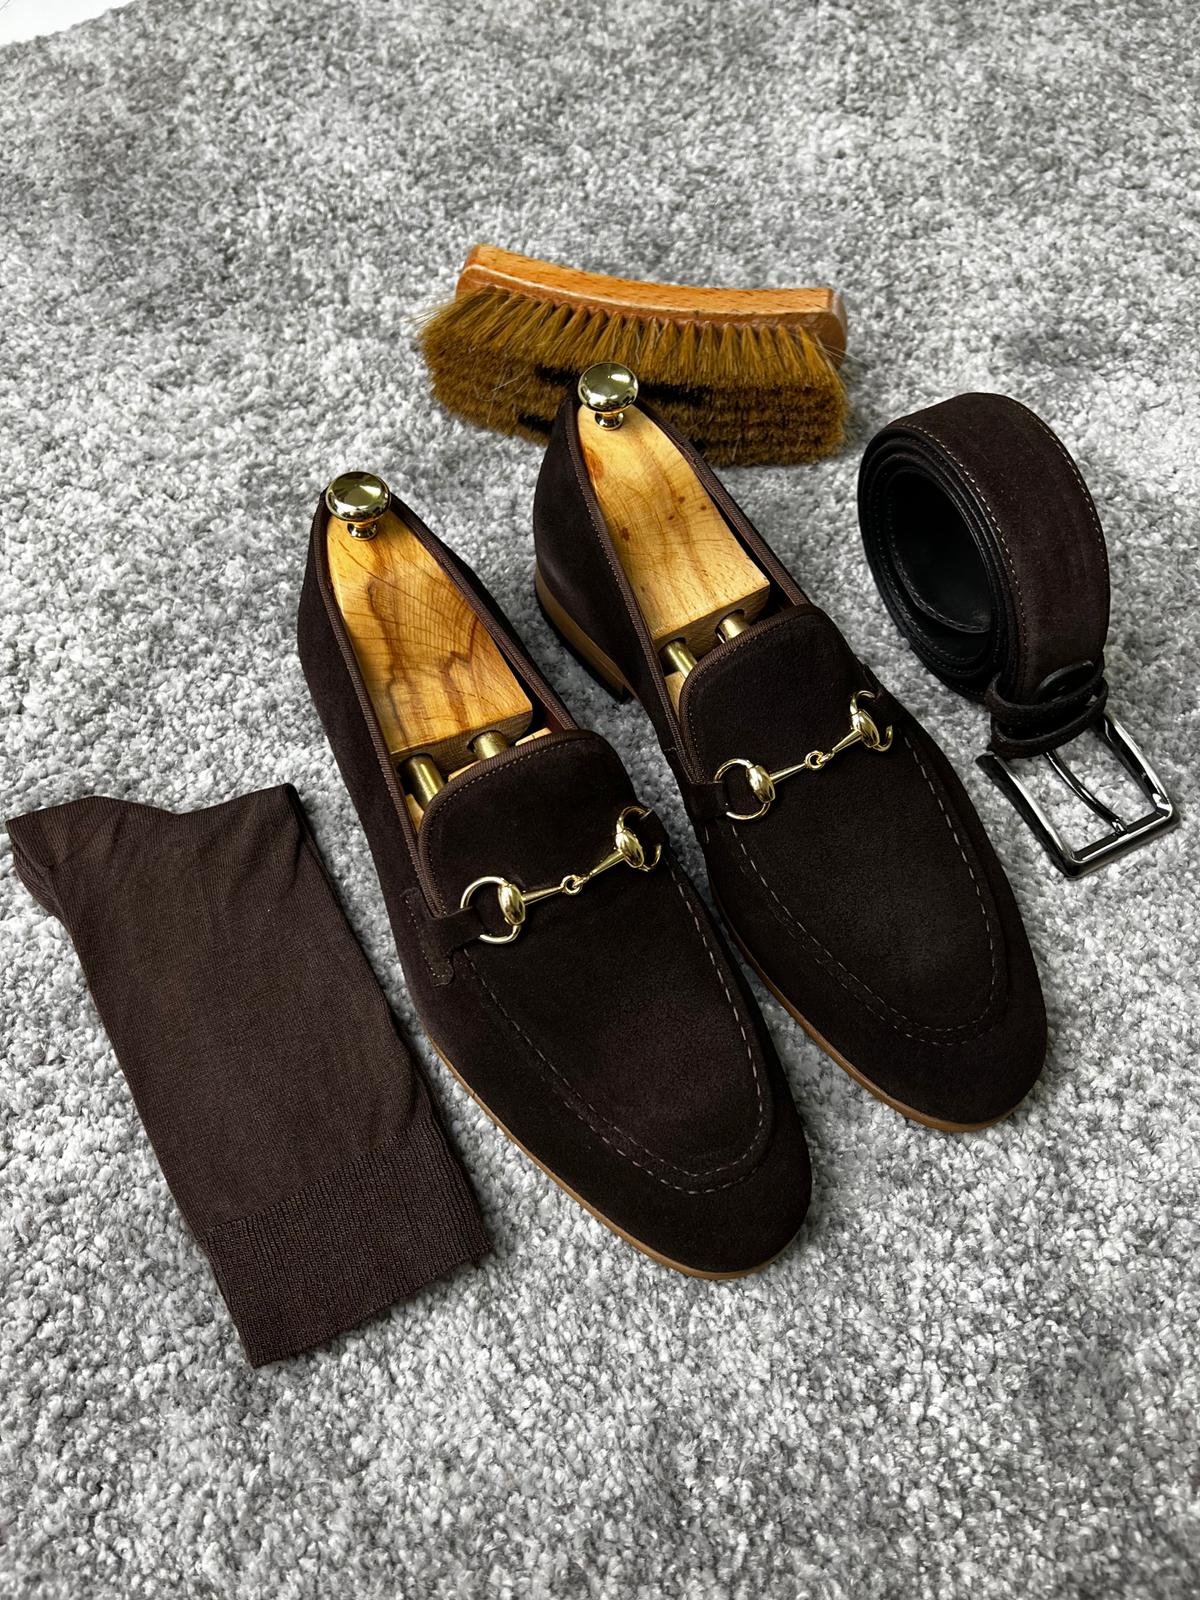 Bojoni Amato Special Edition Neolite Brown Suede Leather Loafer